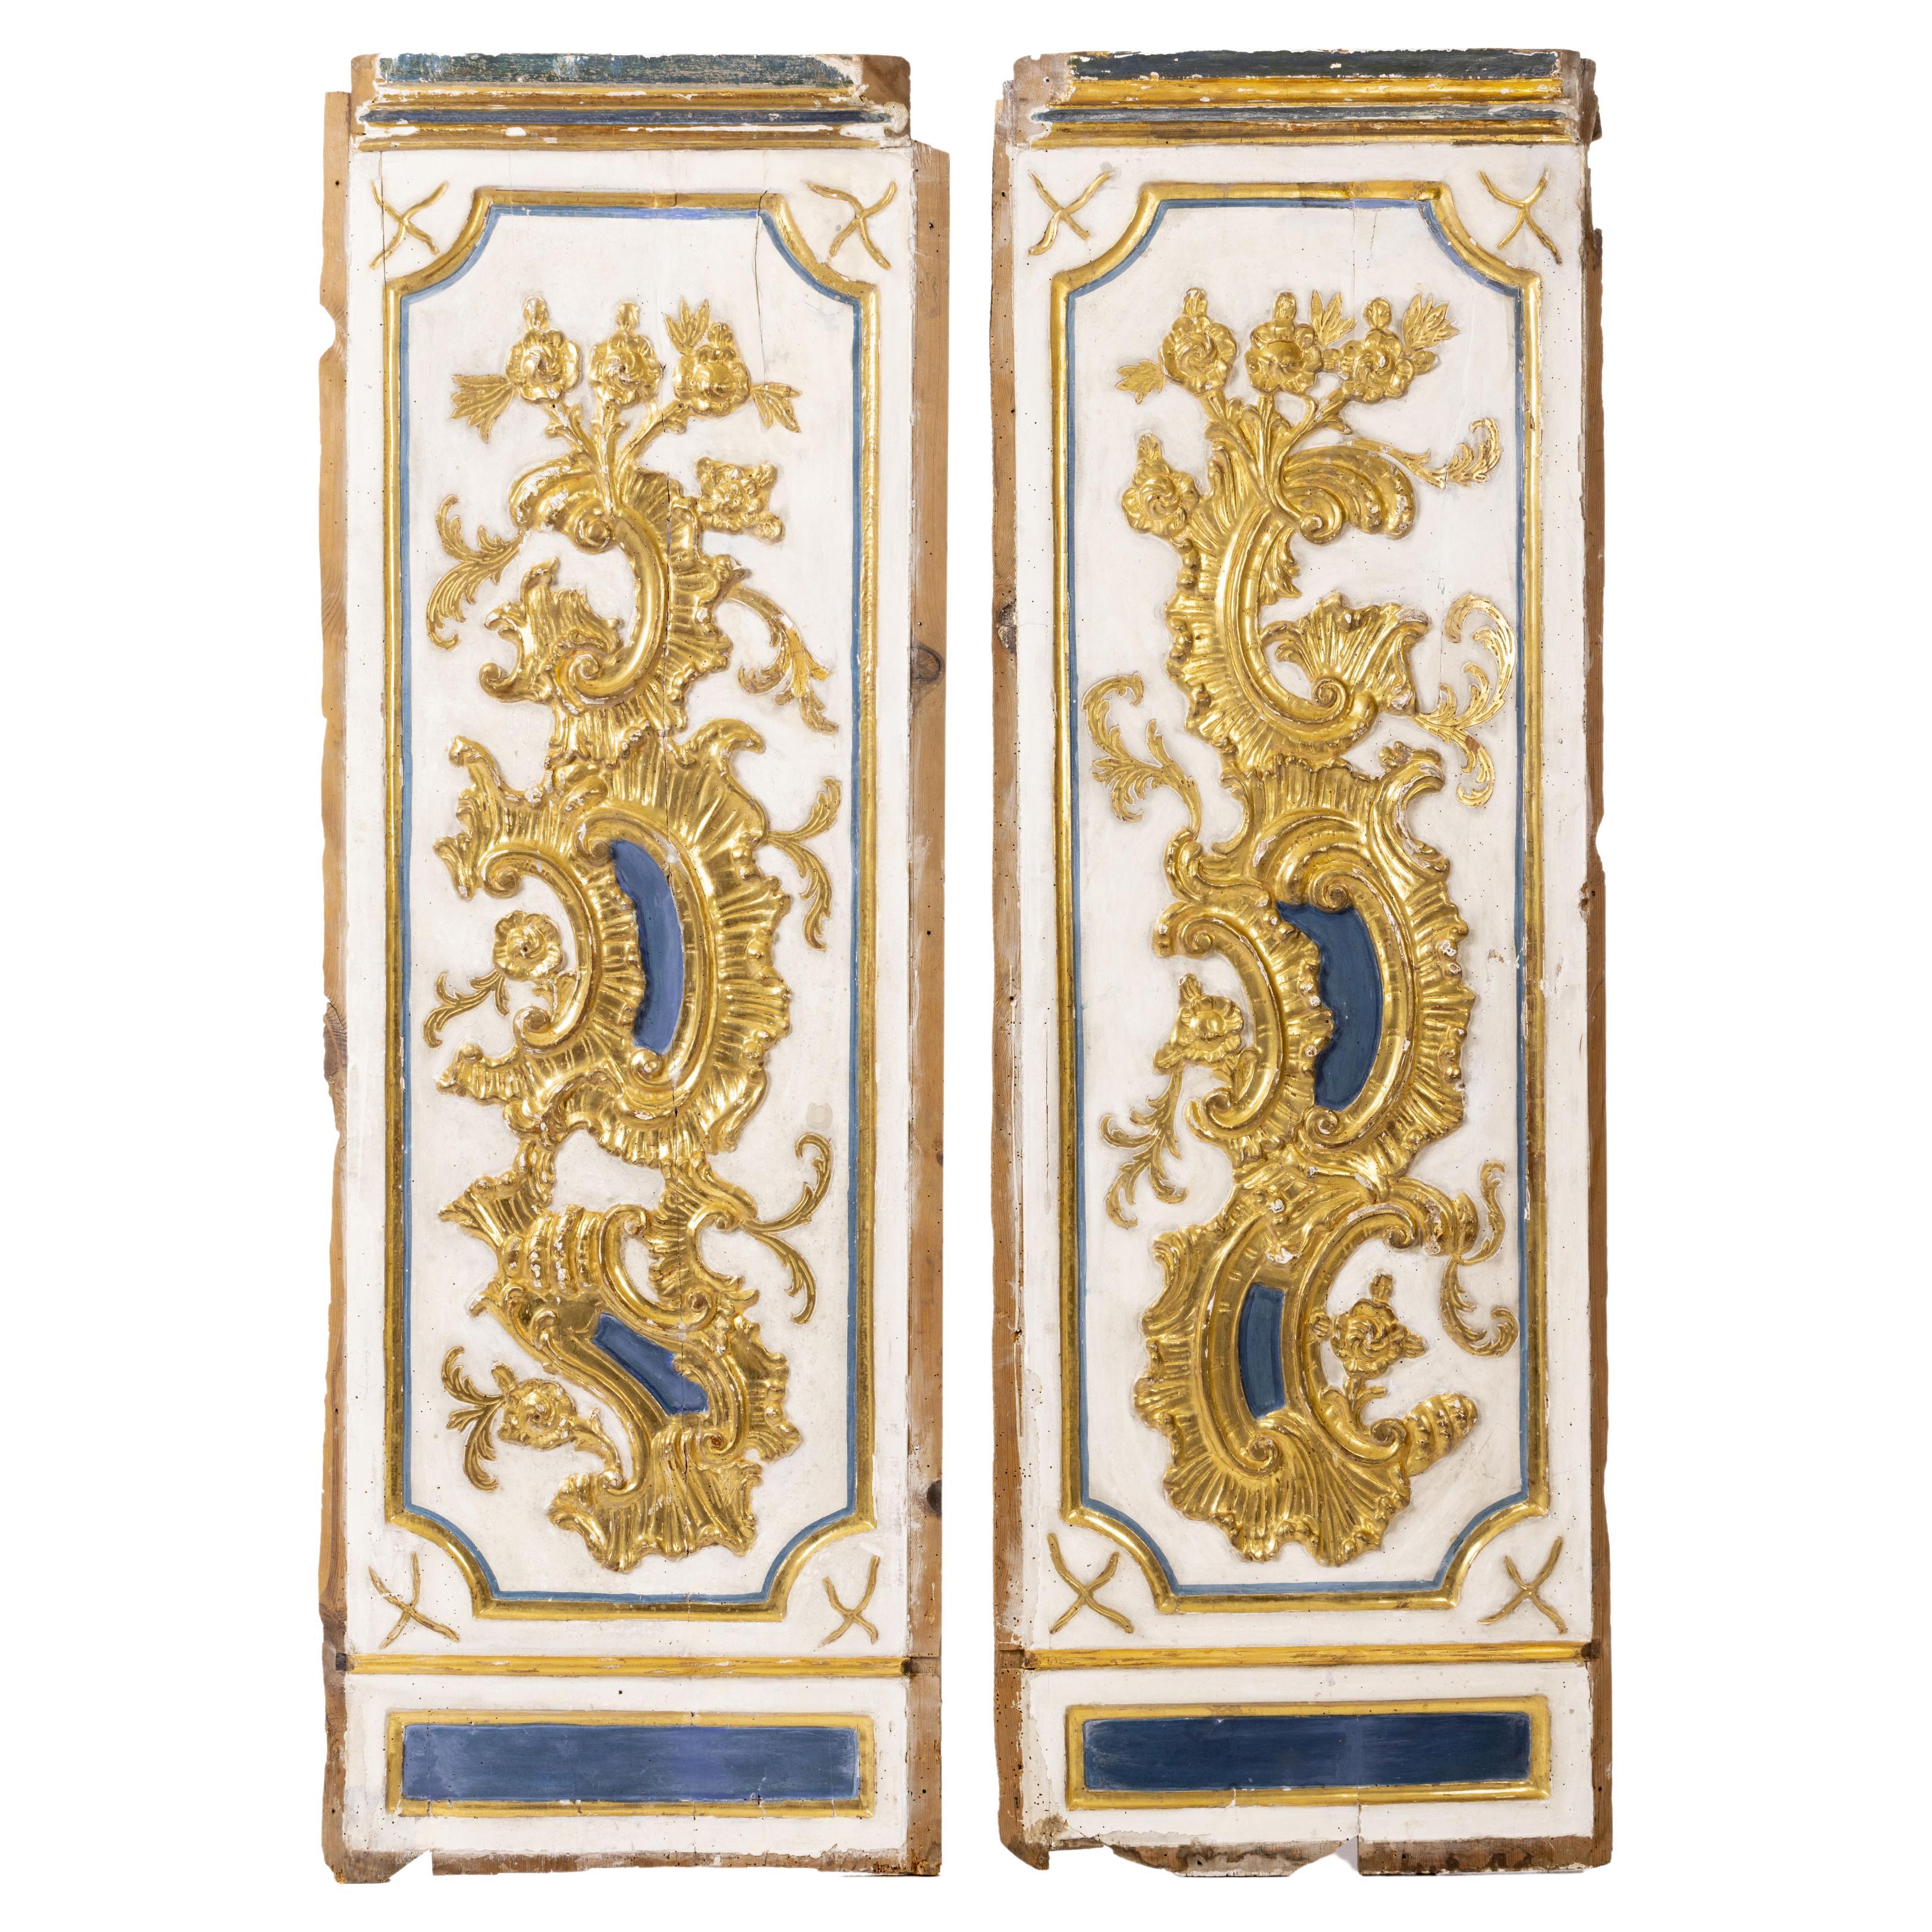 Pair of 18th Century Carved Giltwood Boiserie Wall Panels Spanish Baroque